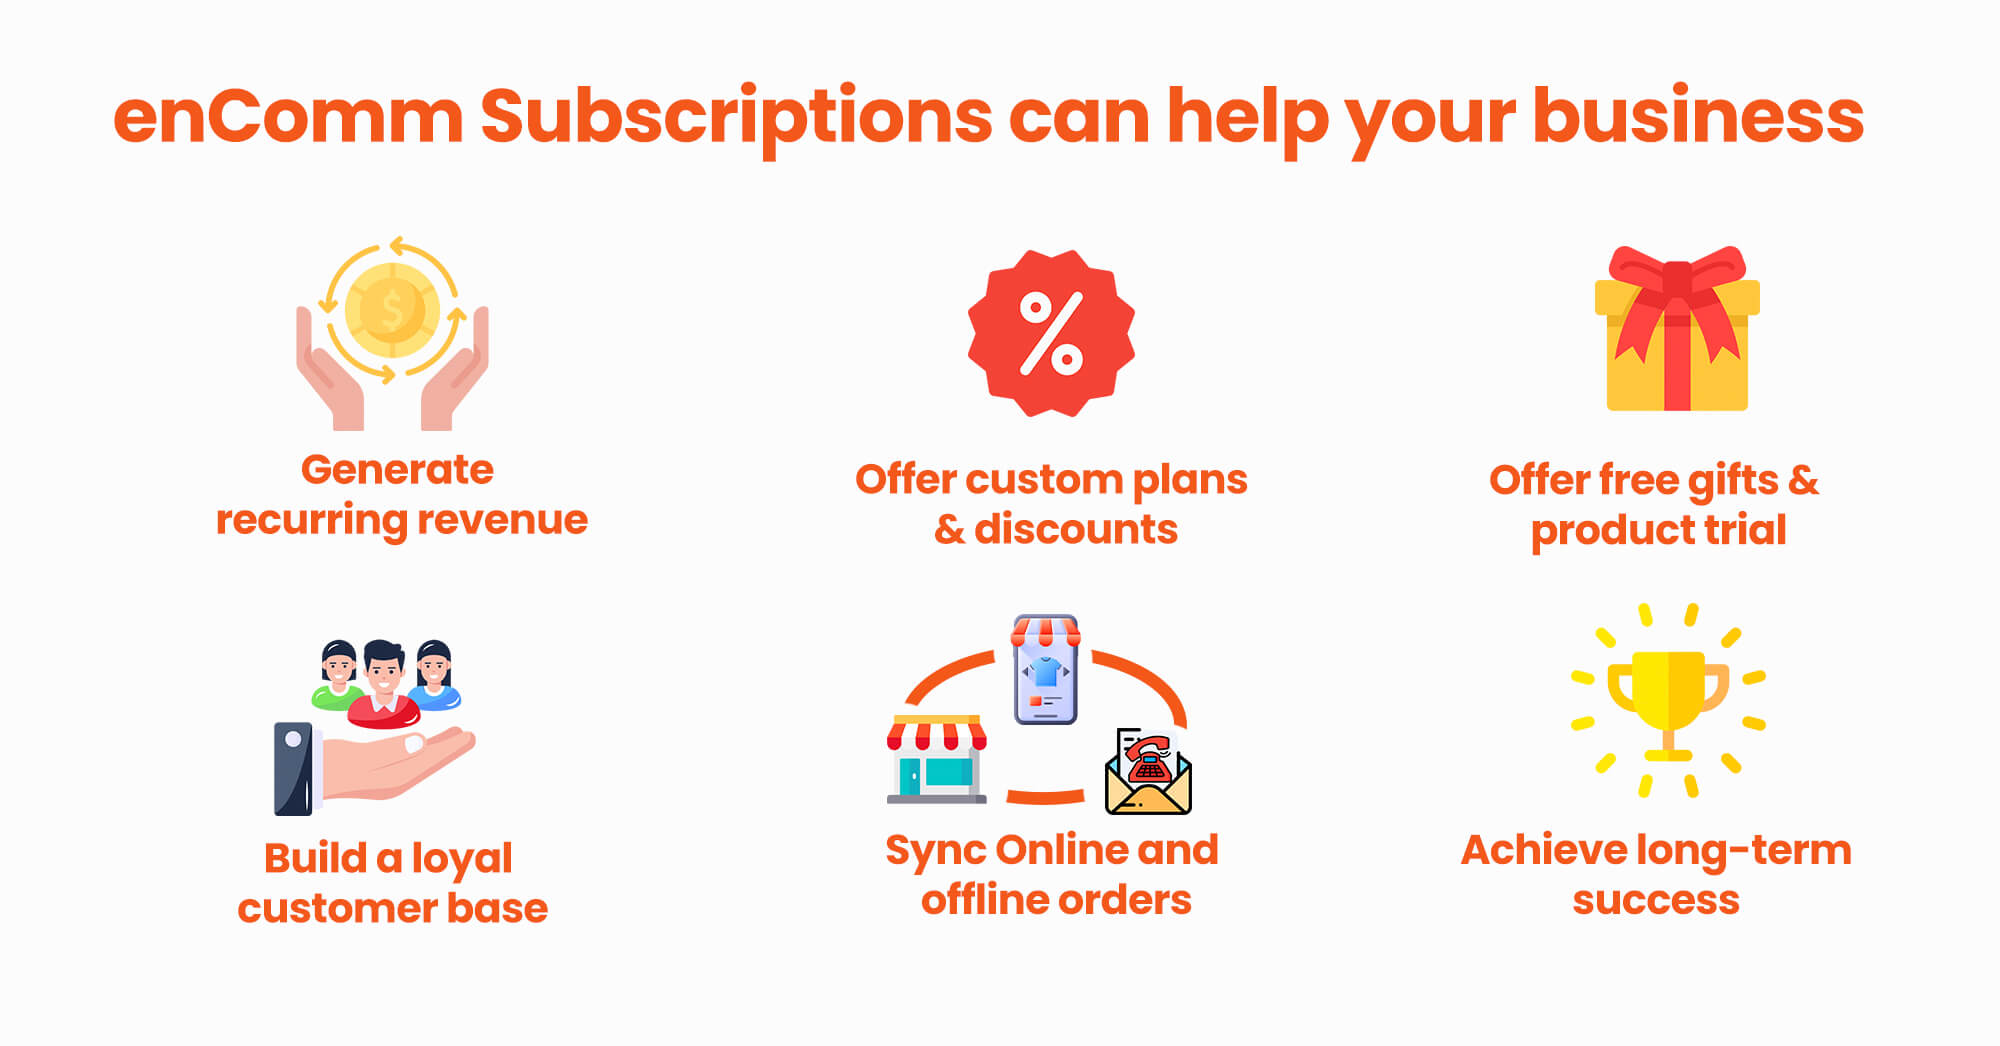 How enComm Subscriptions can help businesses